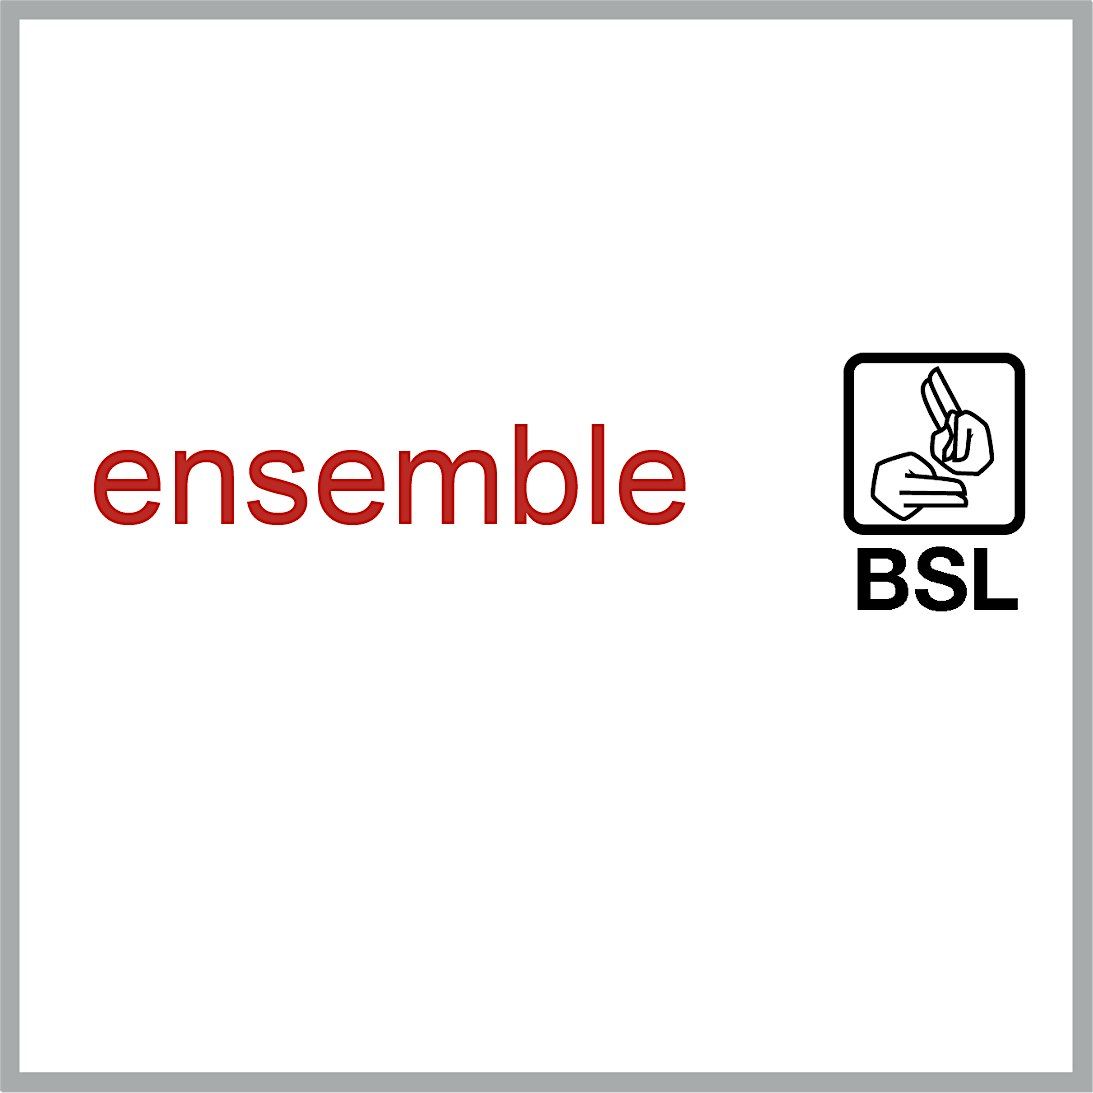 Ensemble Exhibition with BSL Interpretation (2nd session)